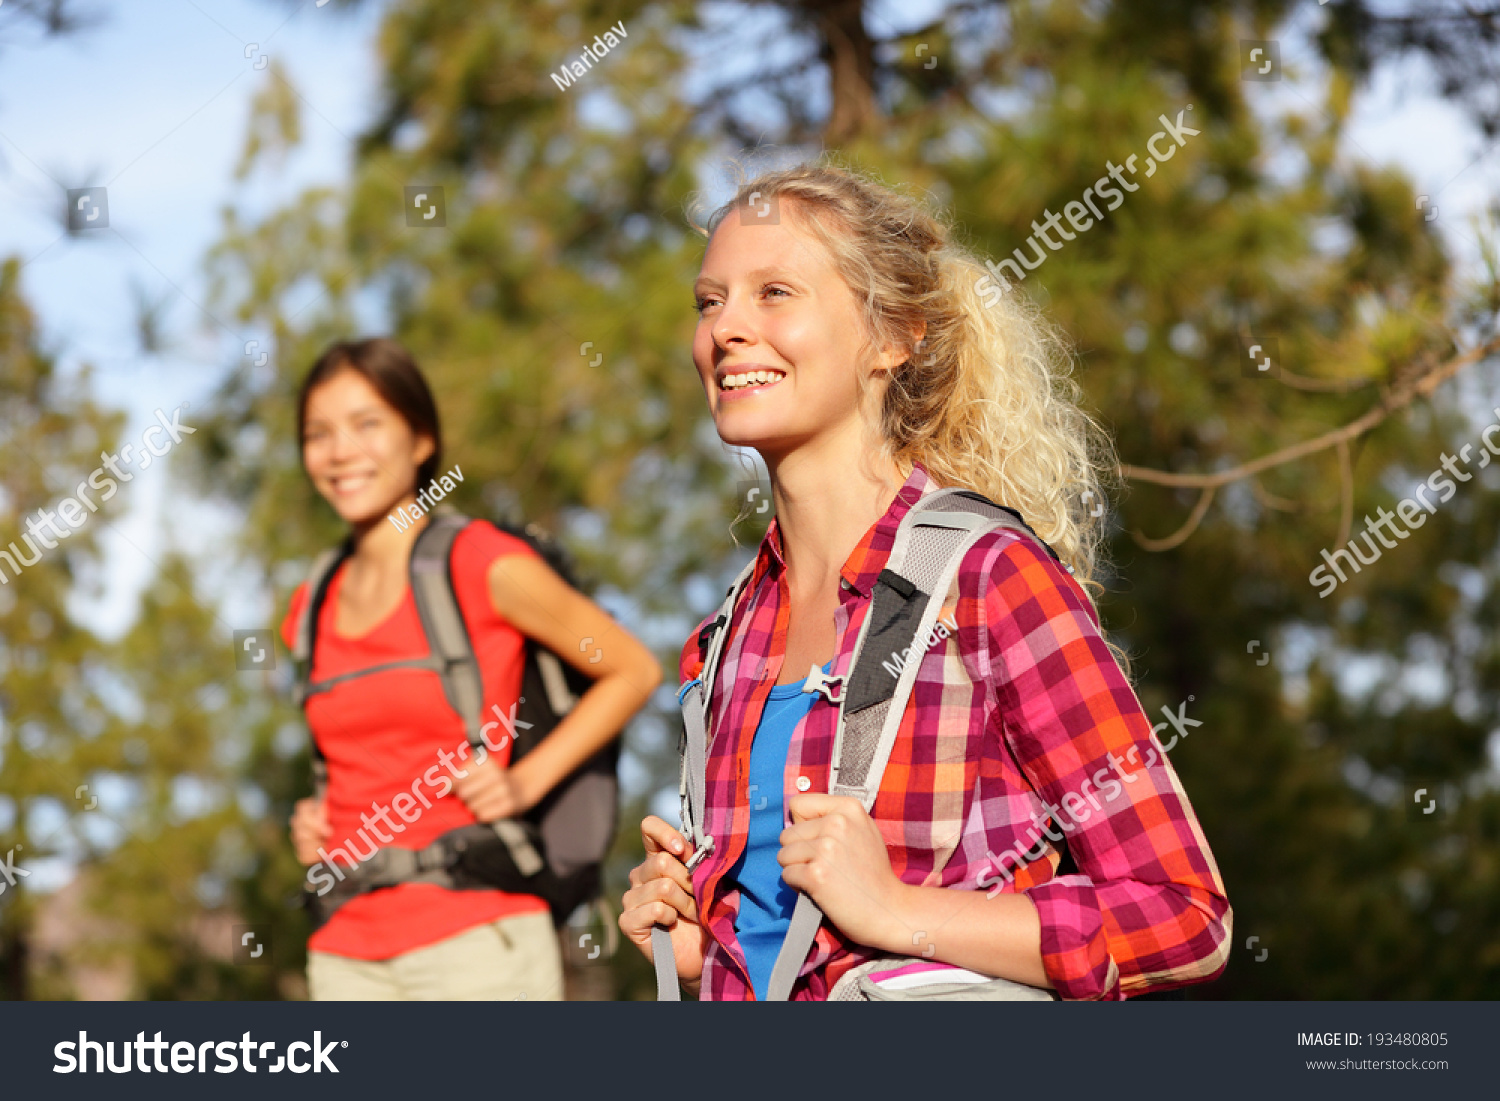 Active Women Hiking Girls Walking Forest Stock Photo (Edit Now) 193480805